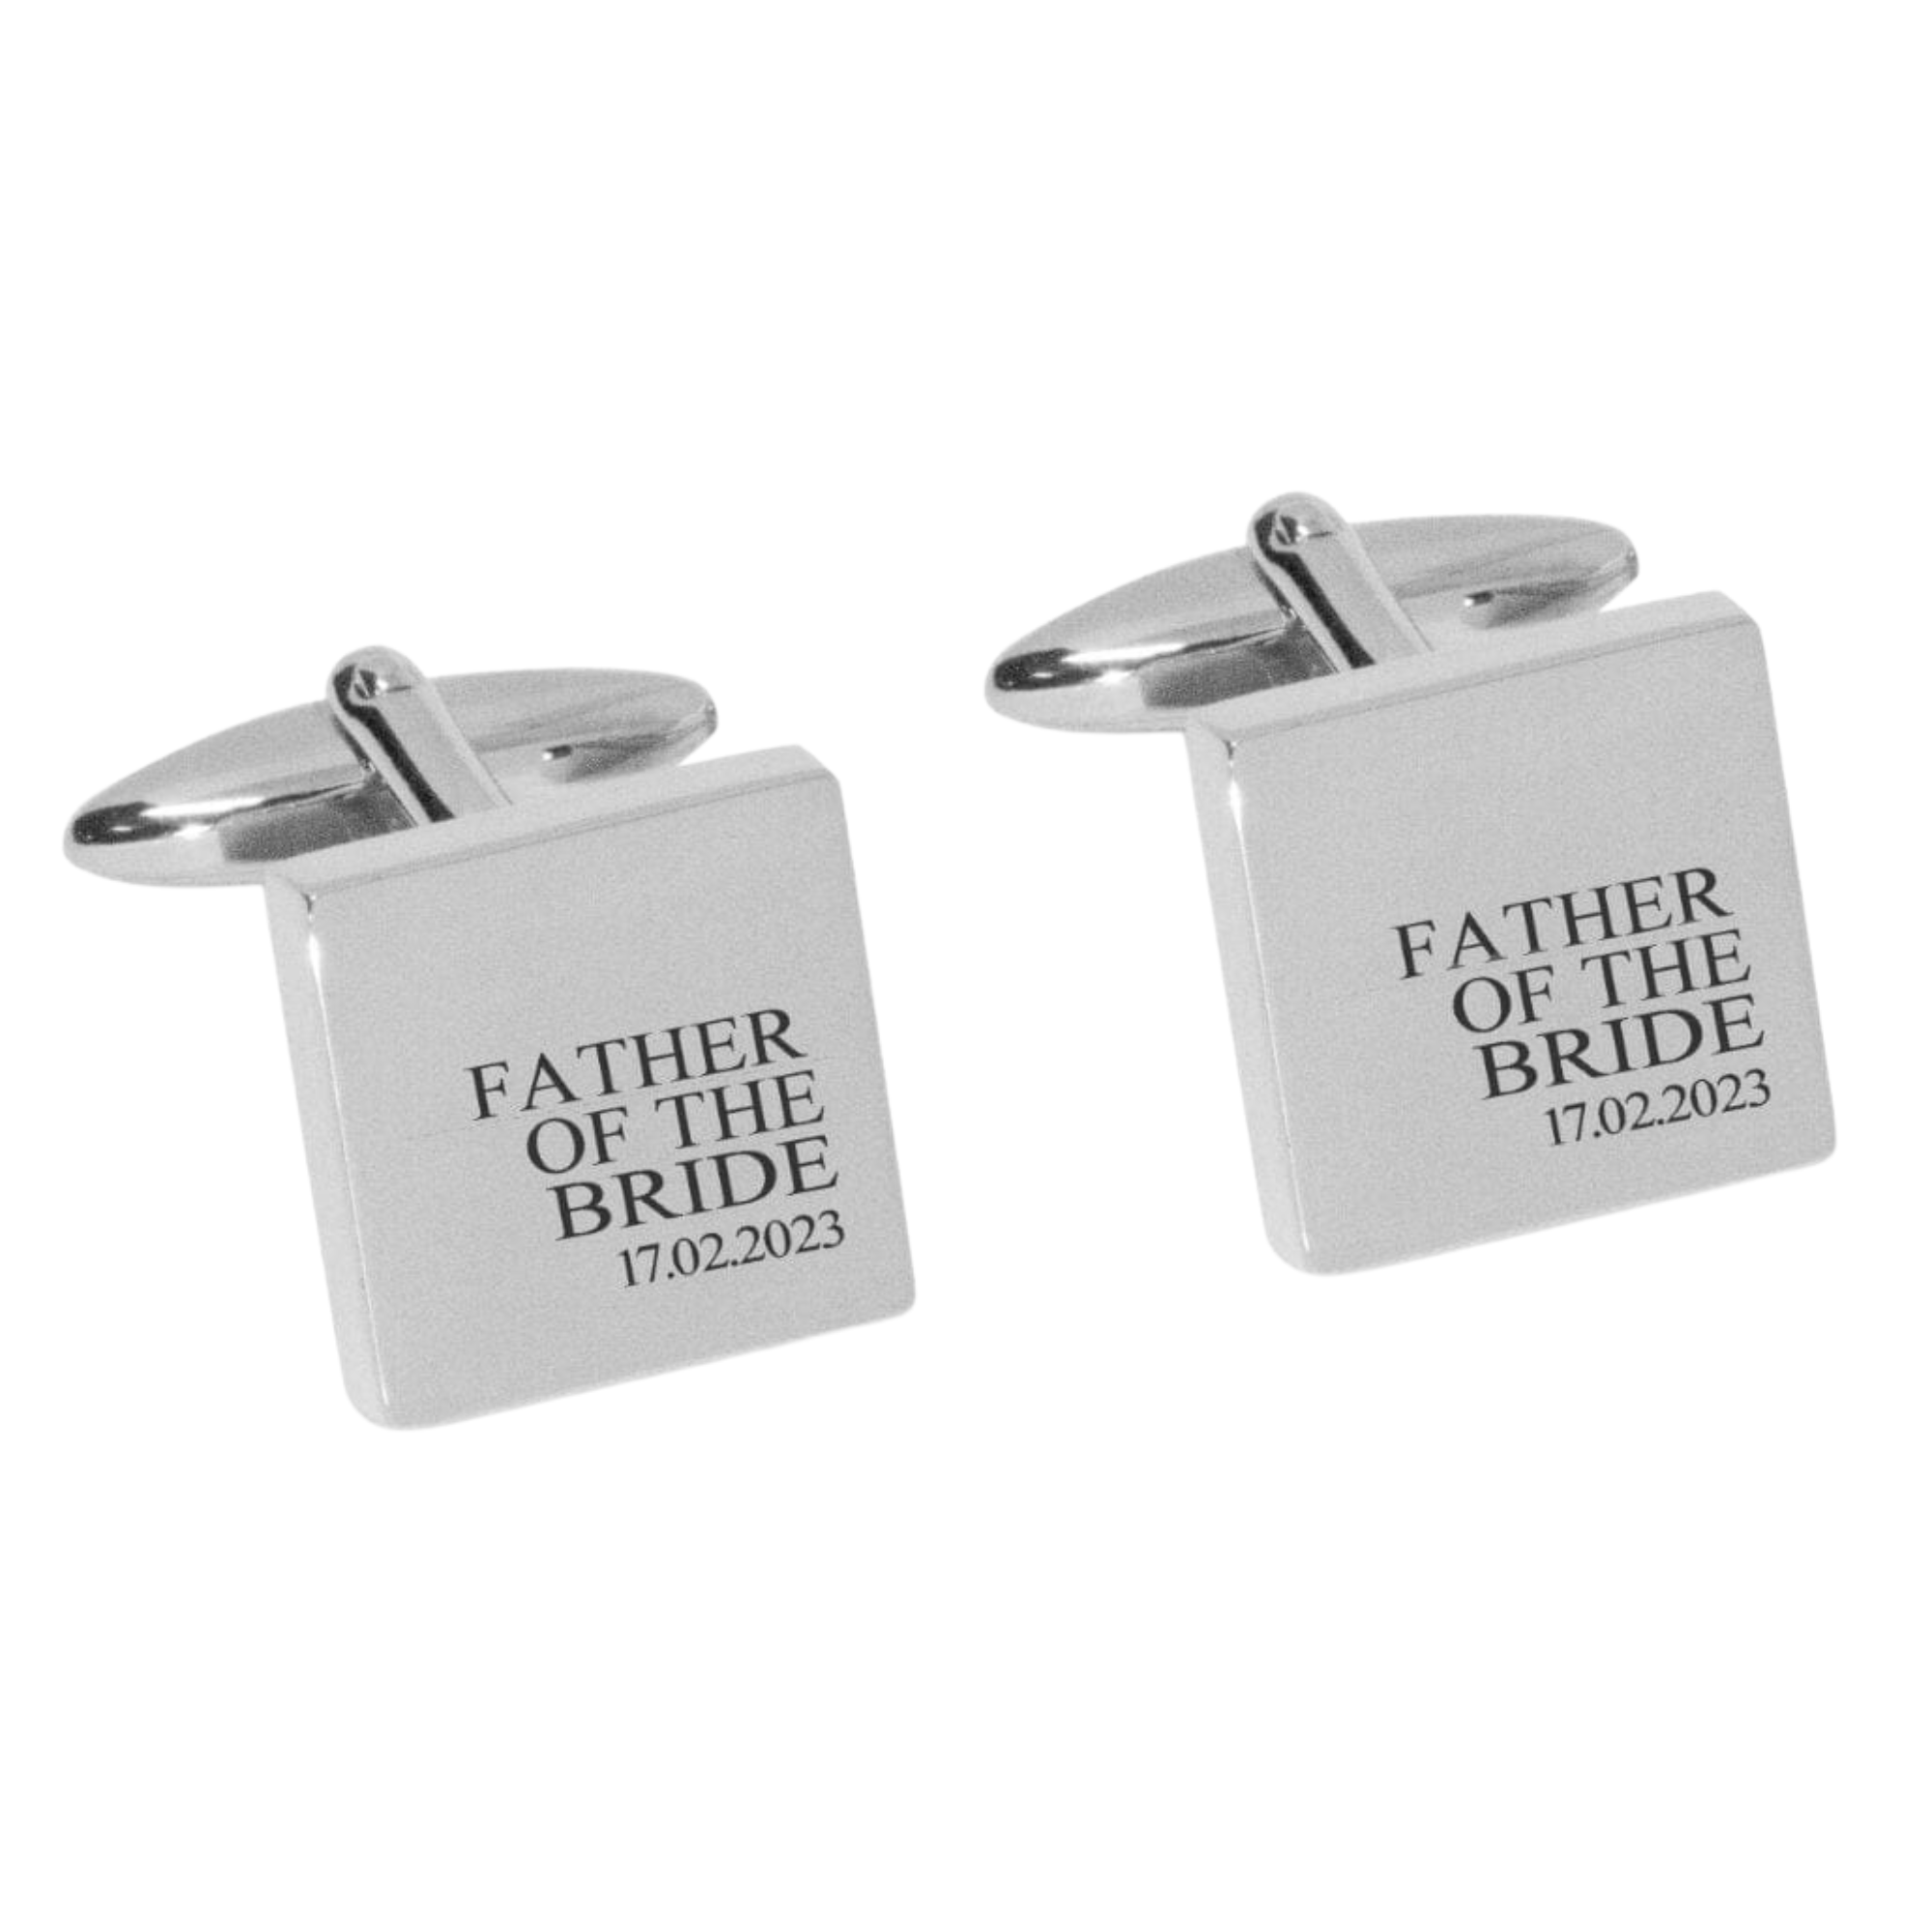 Father of the Bride & Date Engraved Wedding Cufflinks in Silver